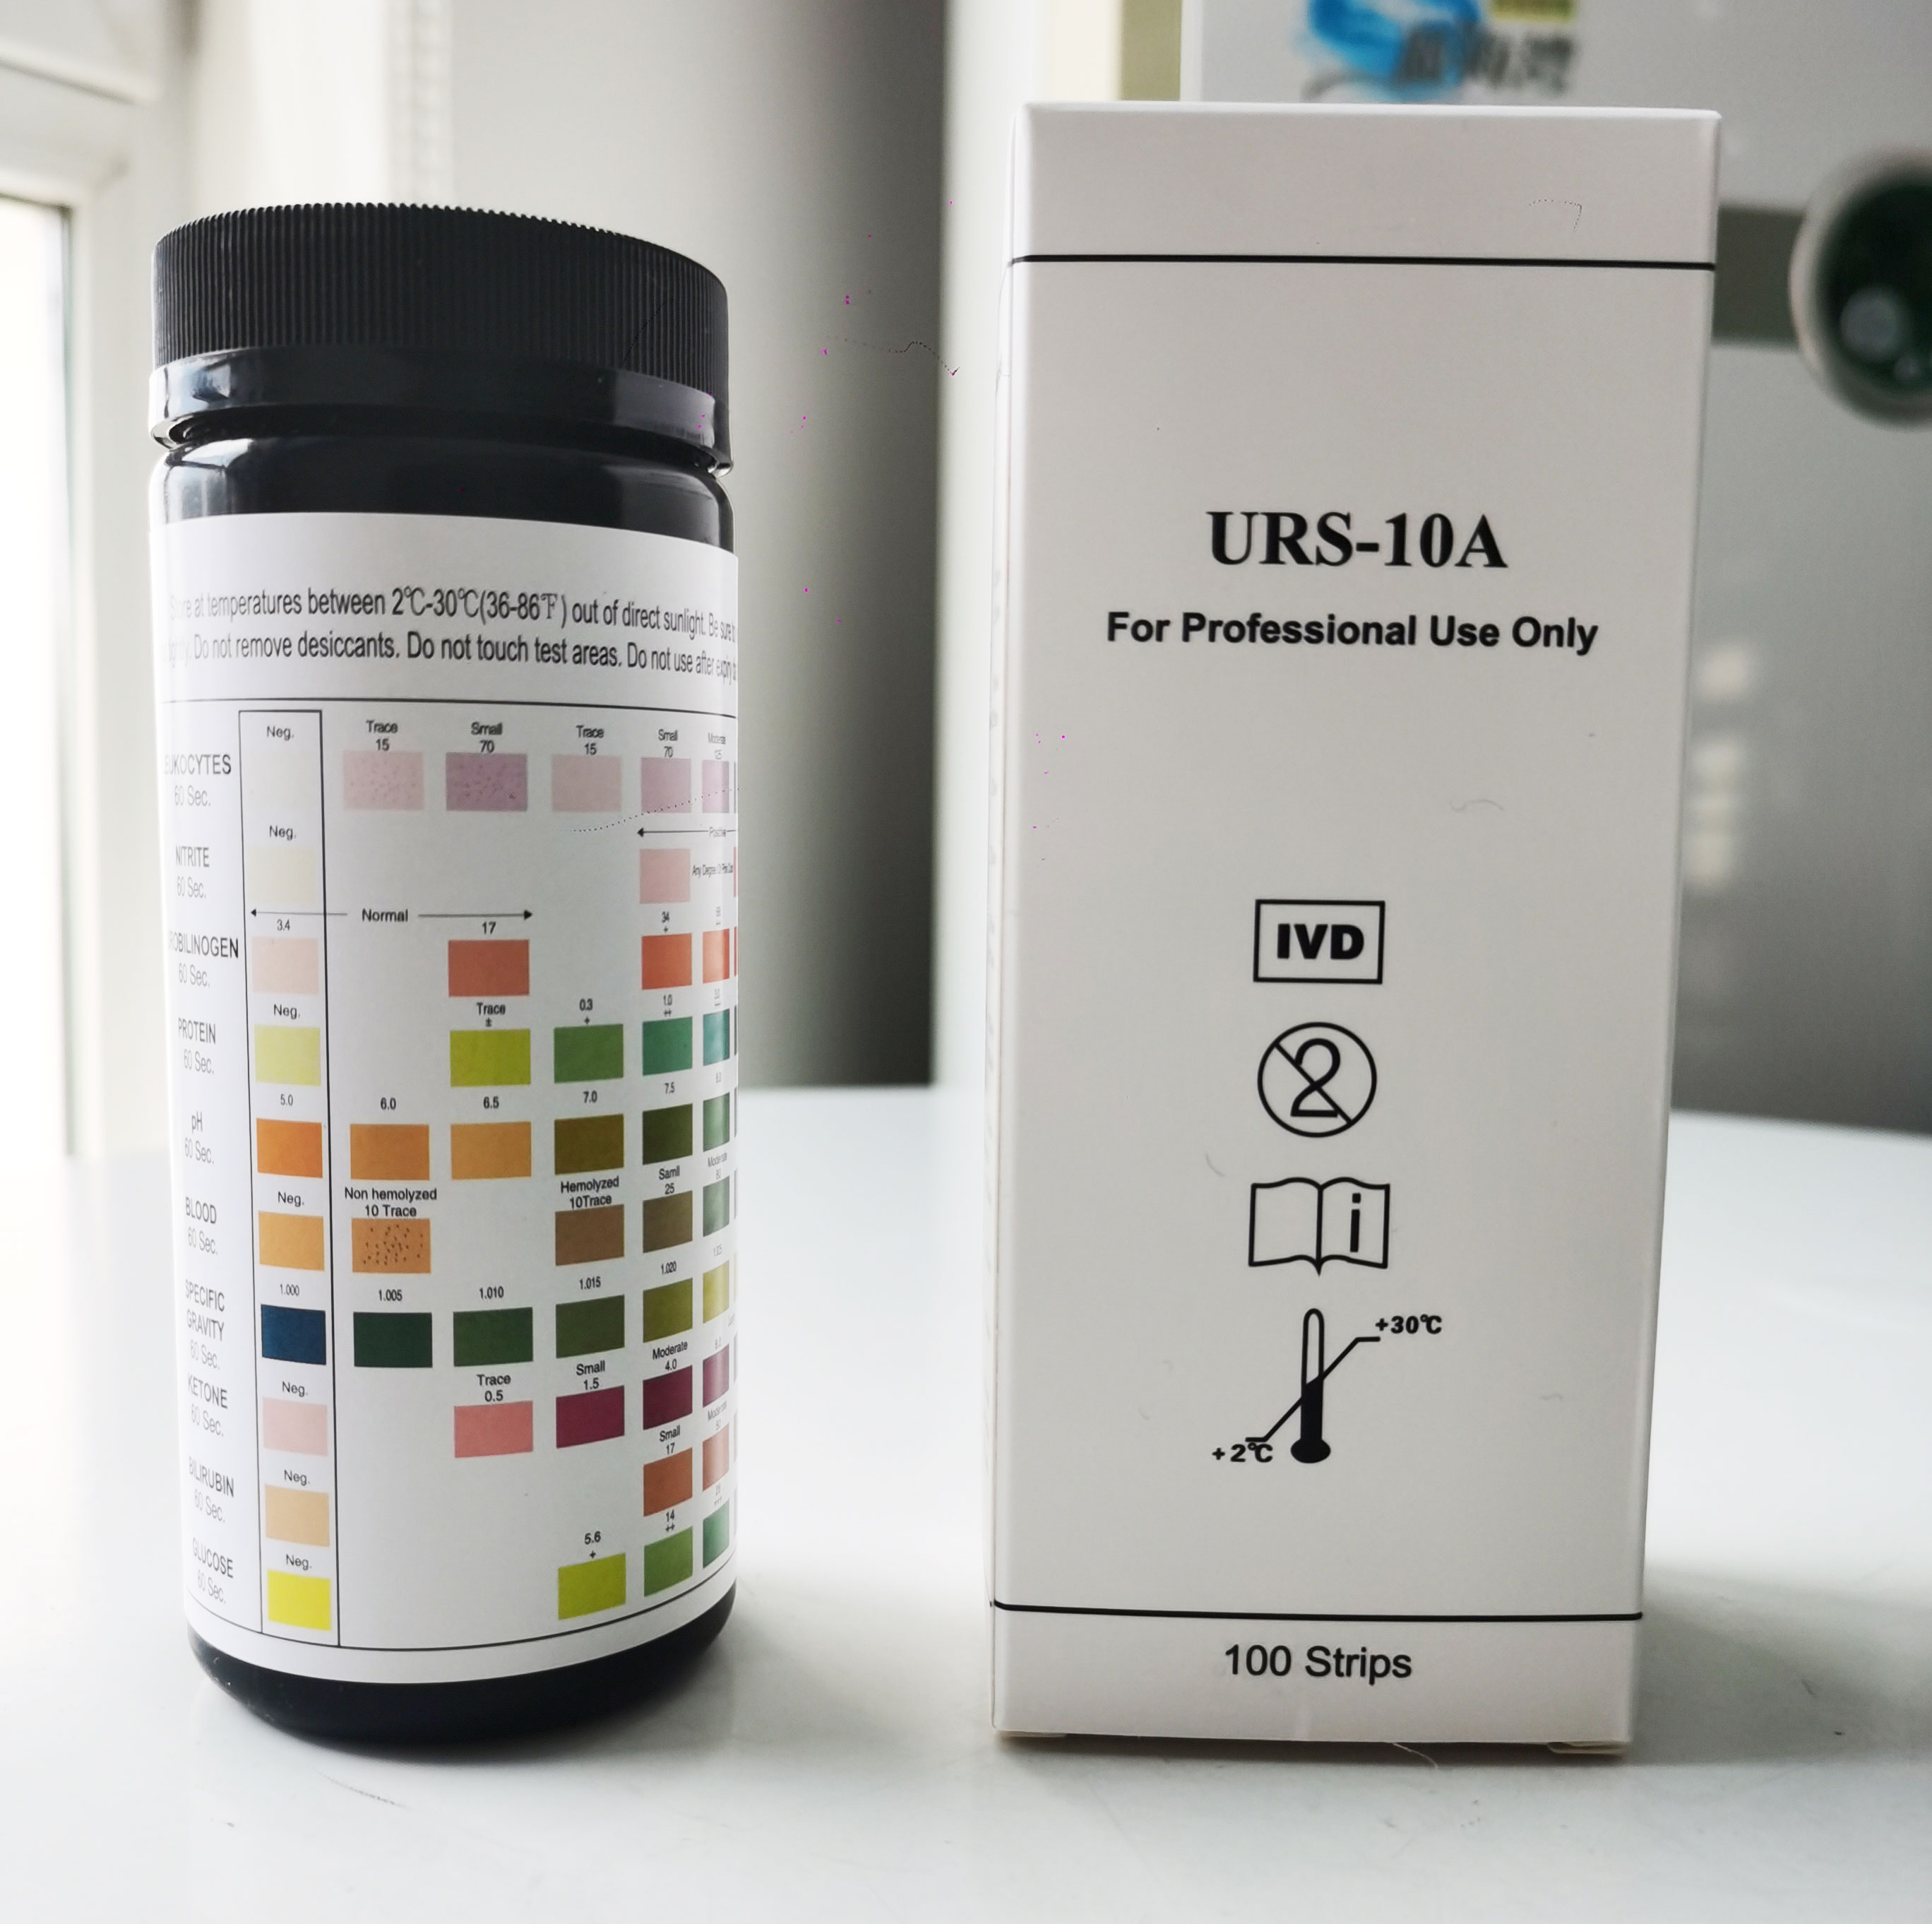 Factory Ce Approved Fast Urine Strip Urinalysis Reagent Strips Test Kit5